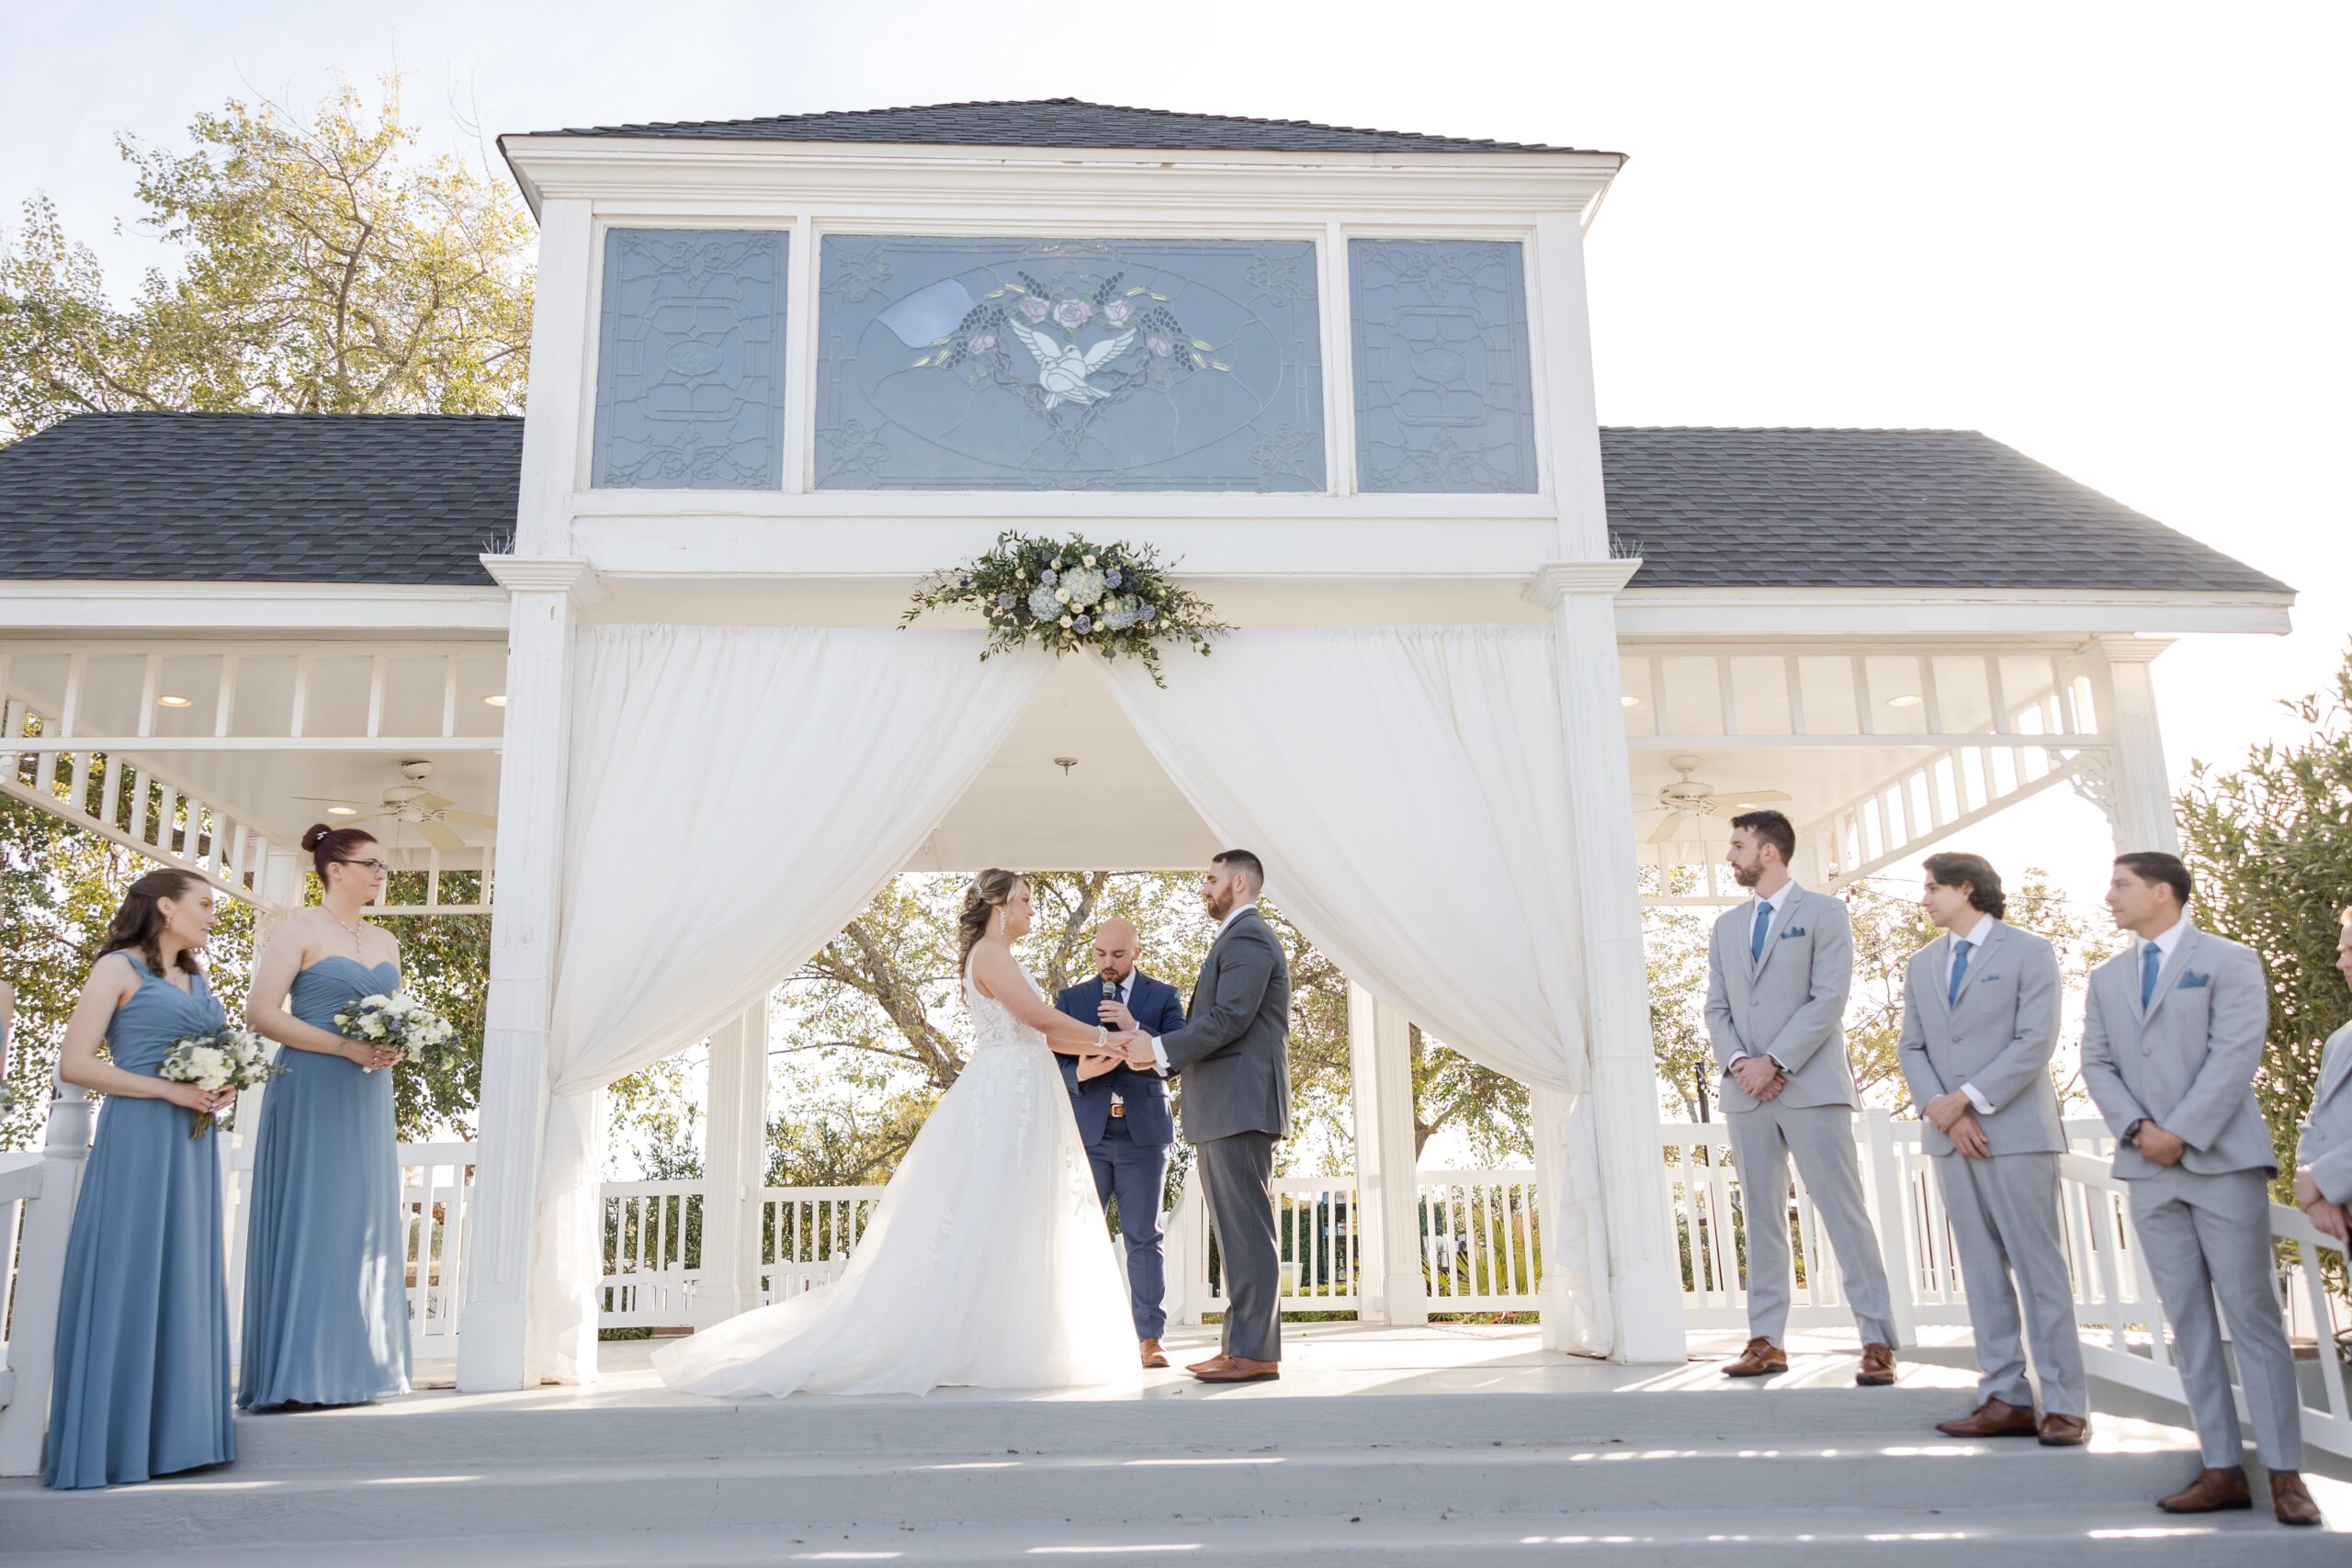 Tips for Best Ceremony Photos by Affordable Wedding Photographers